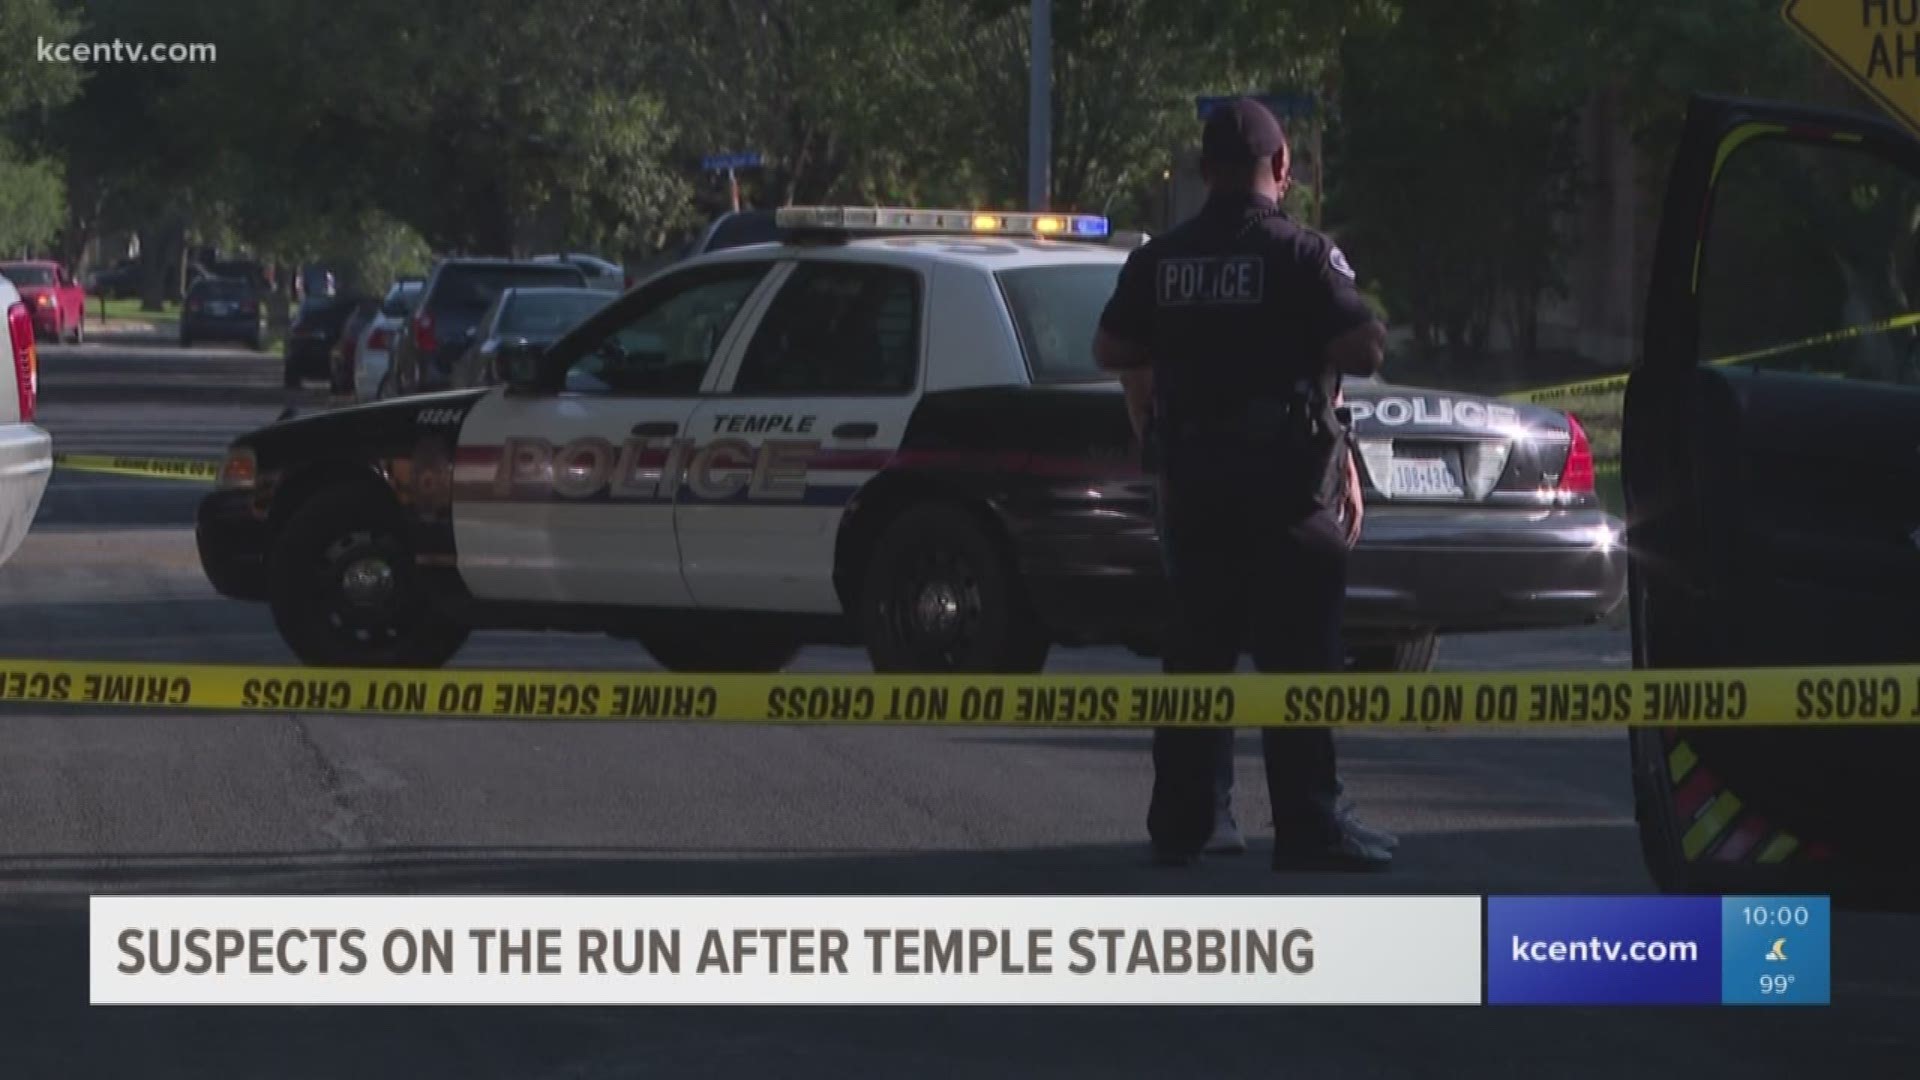 Temple Police Department said a man with stab wounds was taken to a nearby hospital.